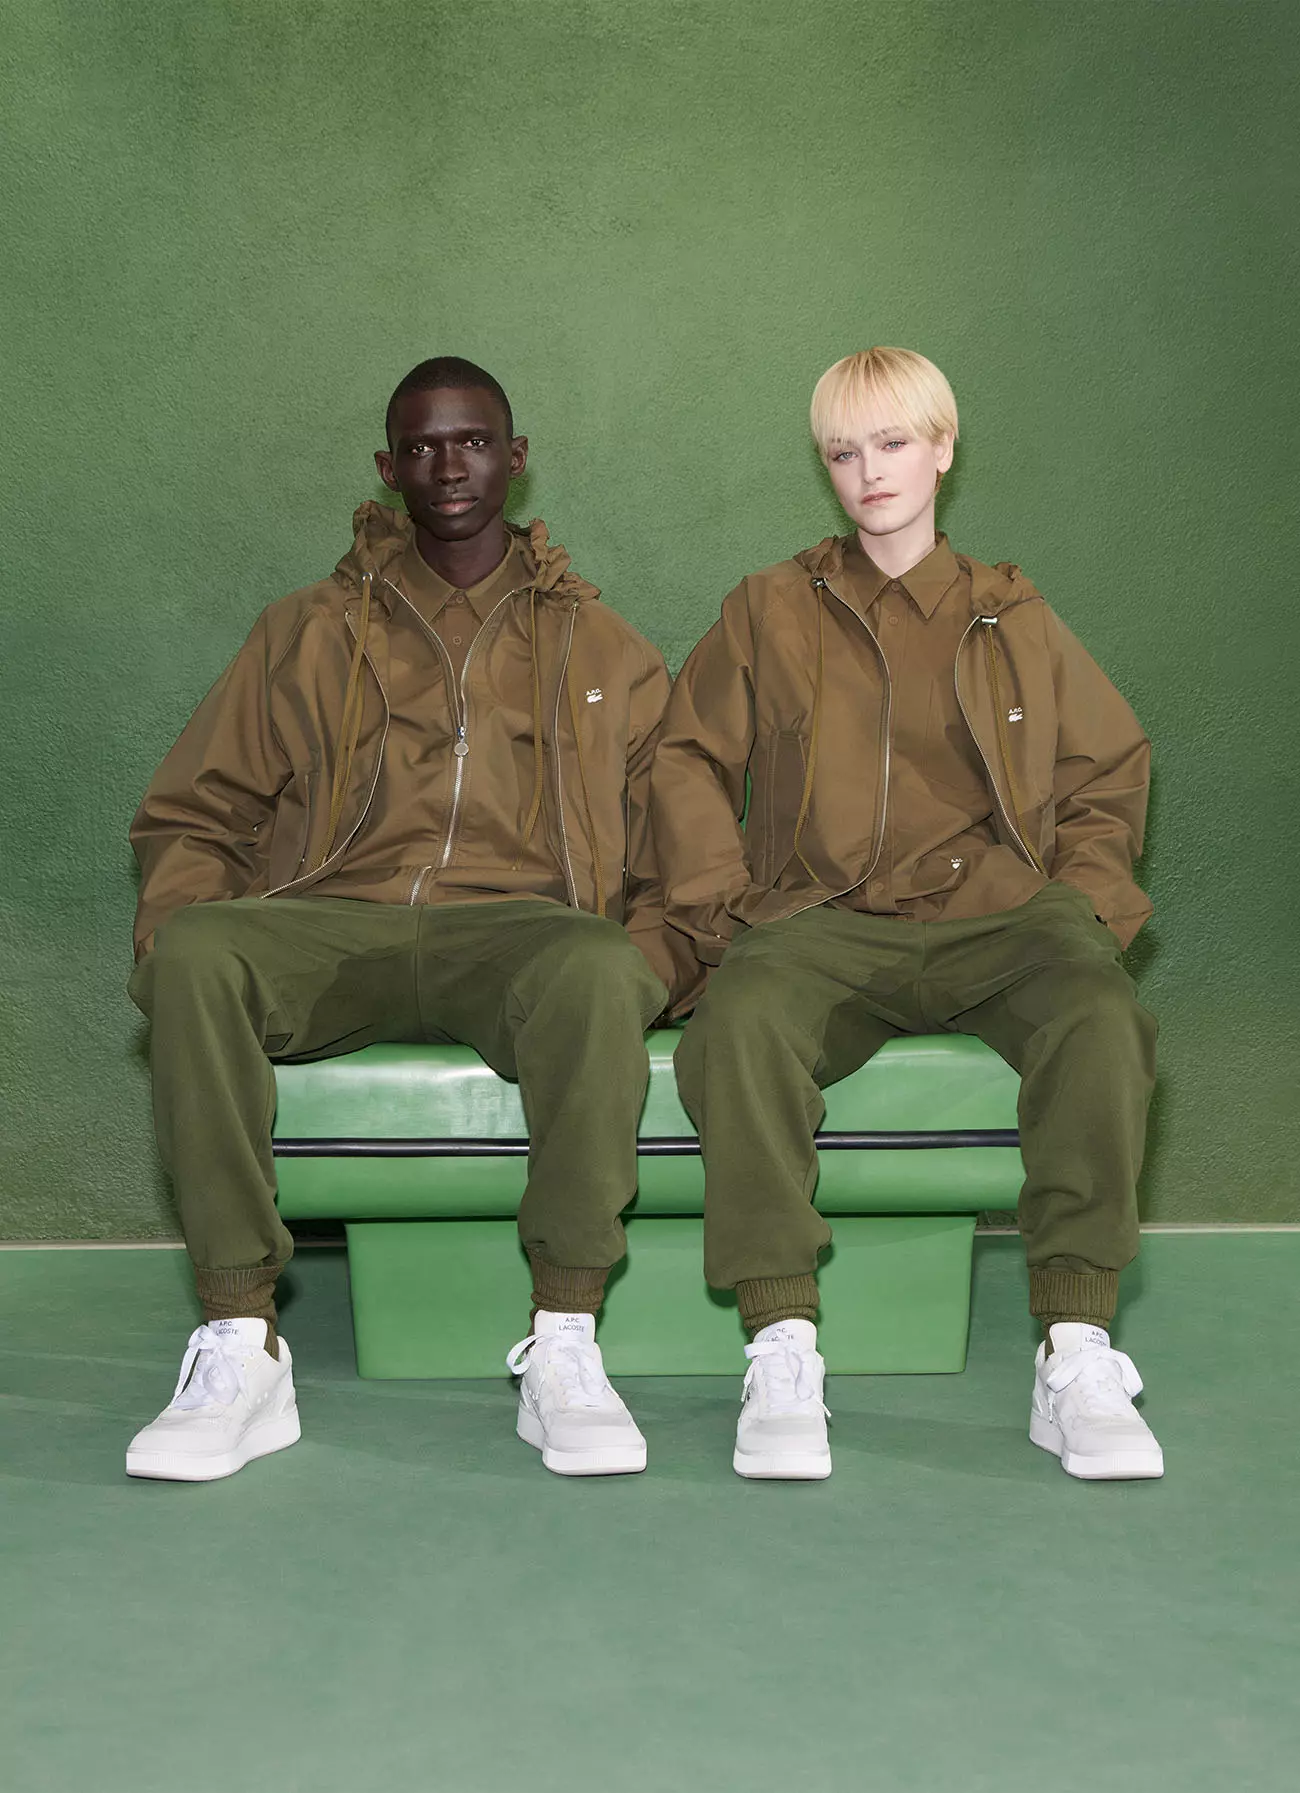 Lacoste x A.P.C., a sportswear collab with a 90's spirit that looks awesome